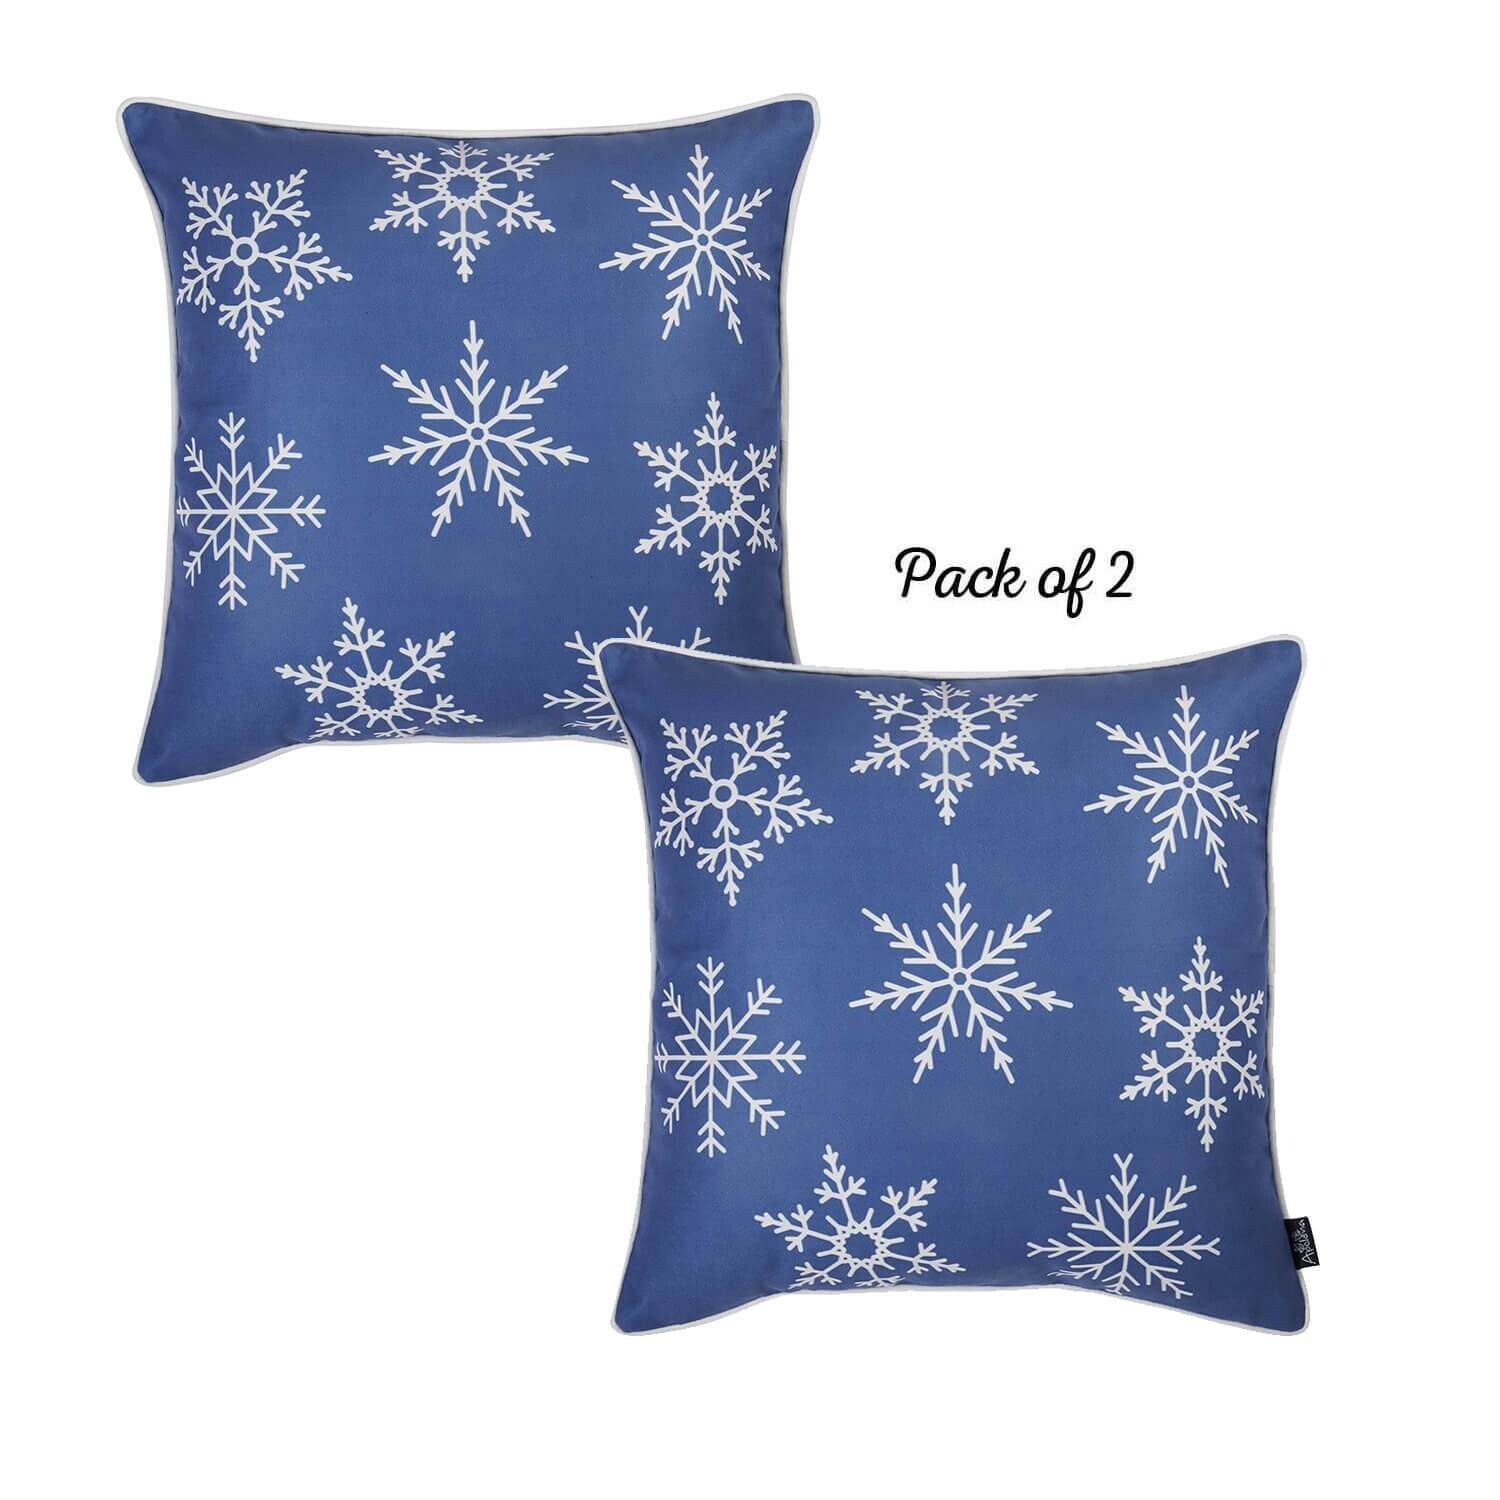 https://ak1.ostkcdn.com/images/products/is/images/direct/73f114c7c49a3b95cbe126395f4c1beaa0c223ee/Snowflakes-Throw-Pillow-Cover-18%22x18%22-%282-pcs-in-set%29-Christmas-Gift.jpg